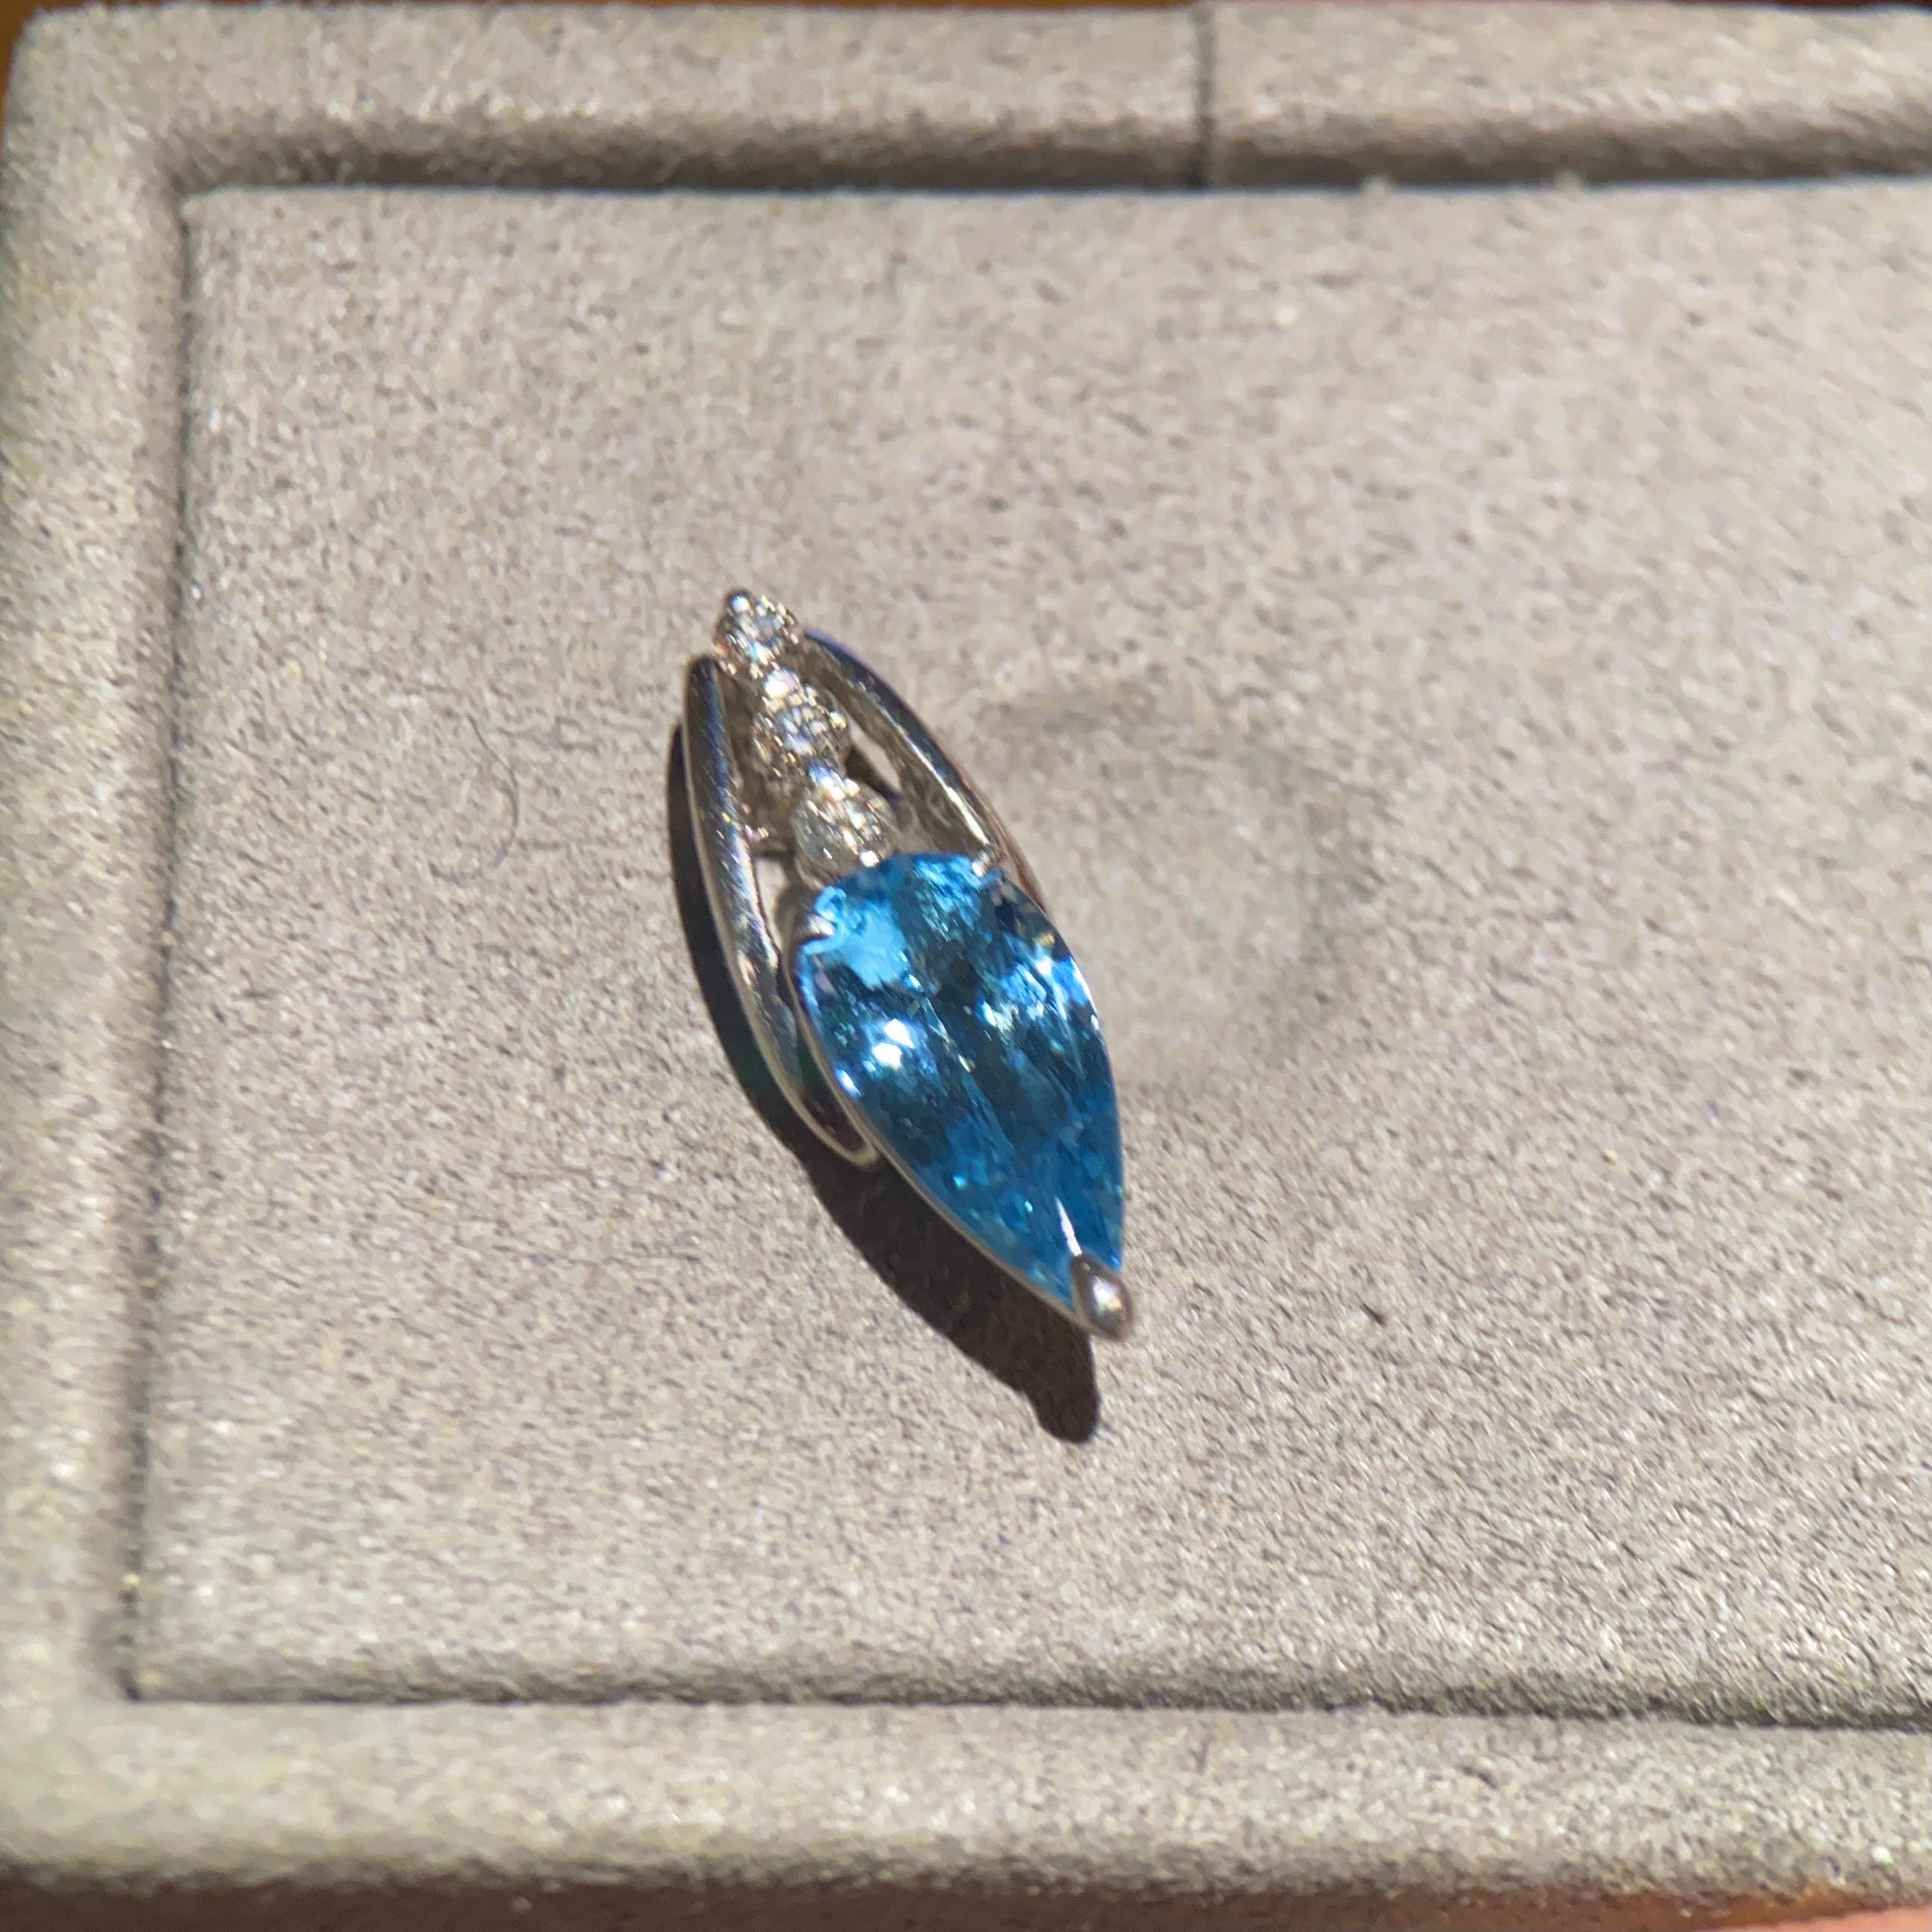 This is a reverse rain drop shape aquamarine set at the bottom half of the pendant. On the top part, there 3 pieces of diamonds. This design is quite unique as jewellers would normally set this as a tear drop aquamarine rather than setting it upside